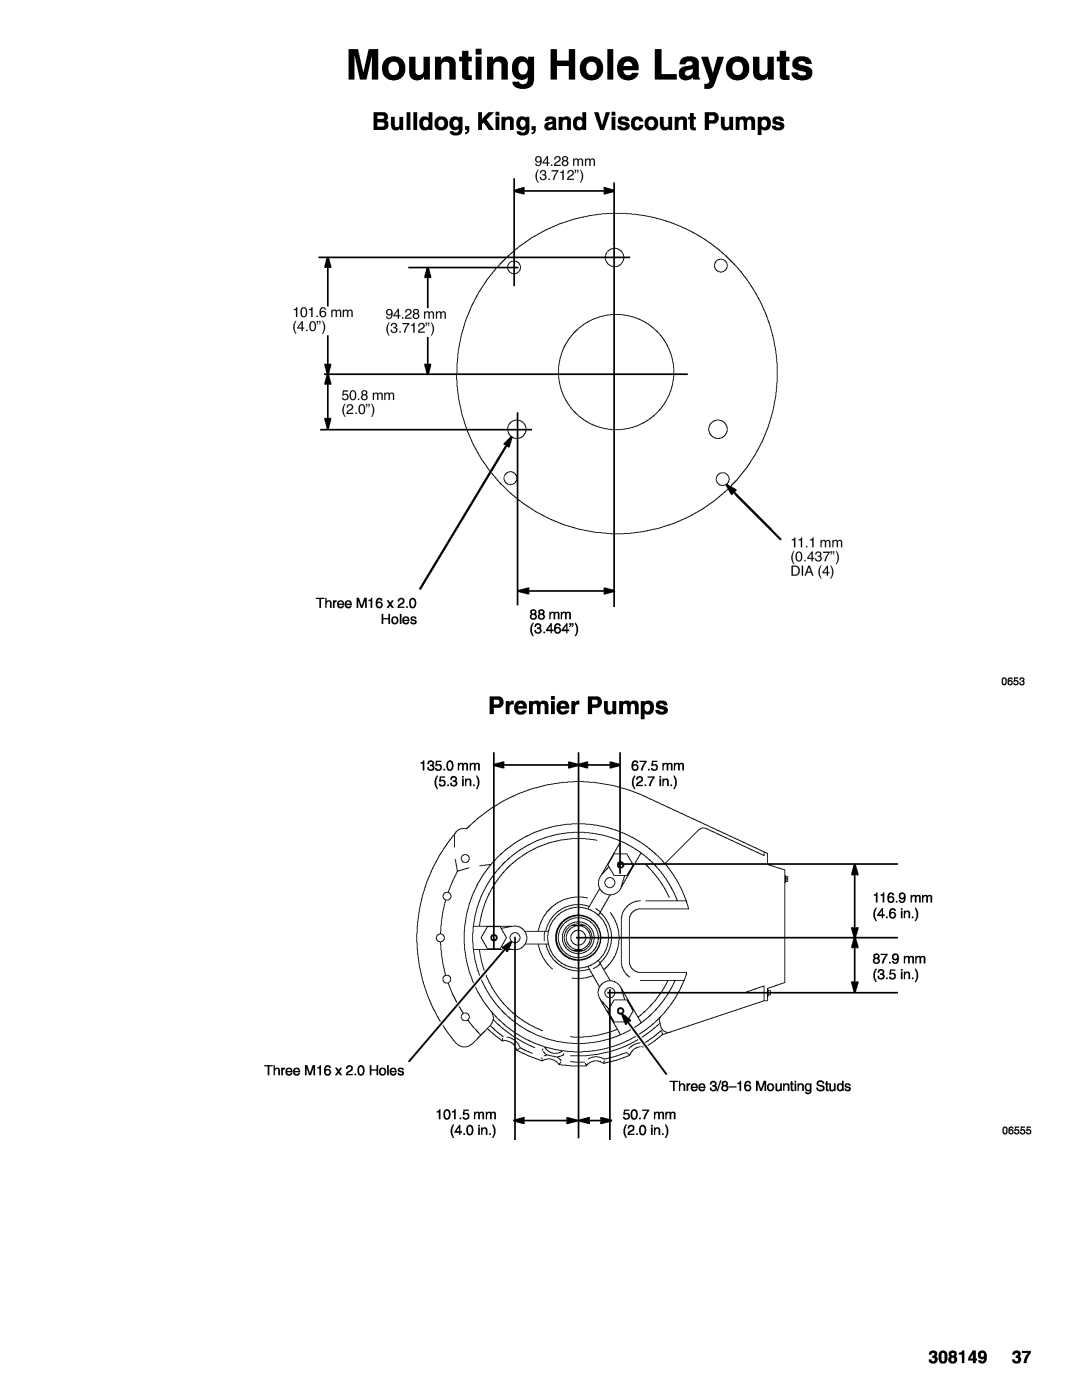 Graco 308149P important safety instructions Mounting Hole Layouts, Bulldog, King, and Viscount Pumps, Premier Pumps 